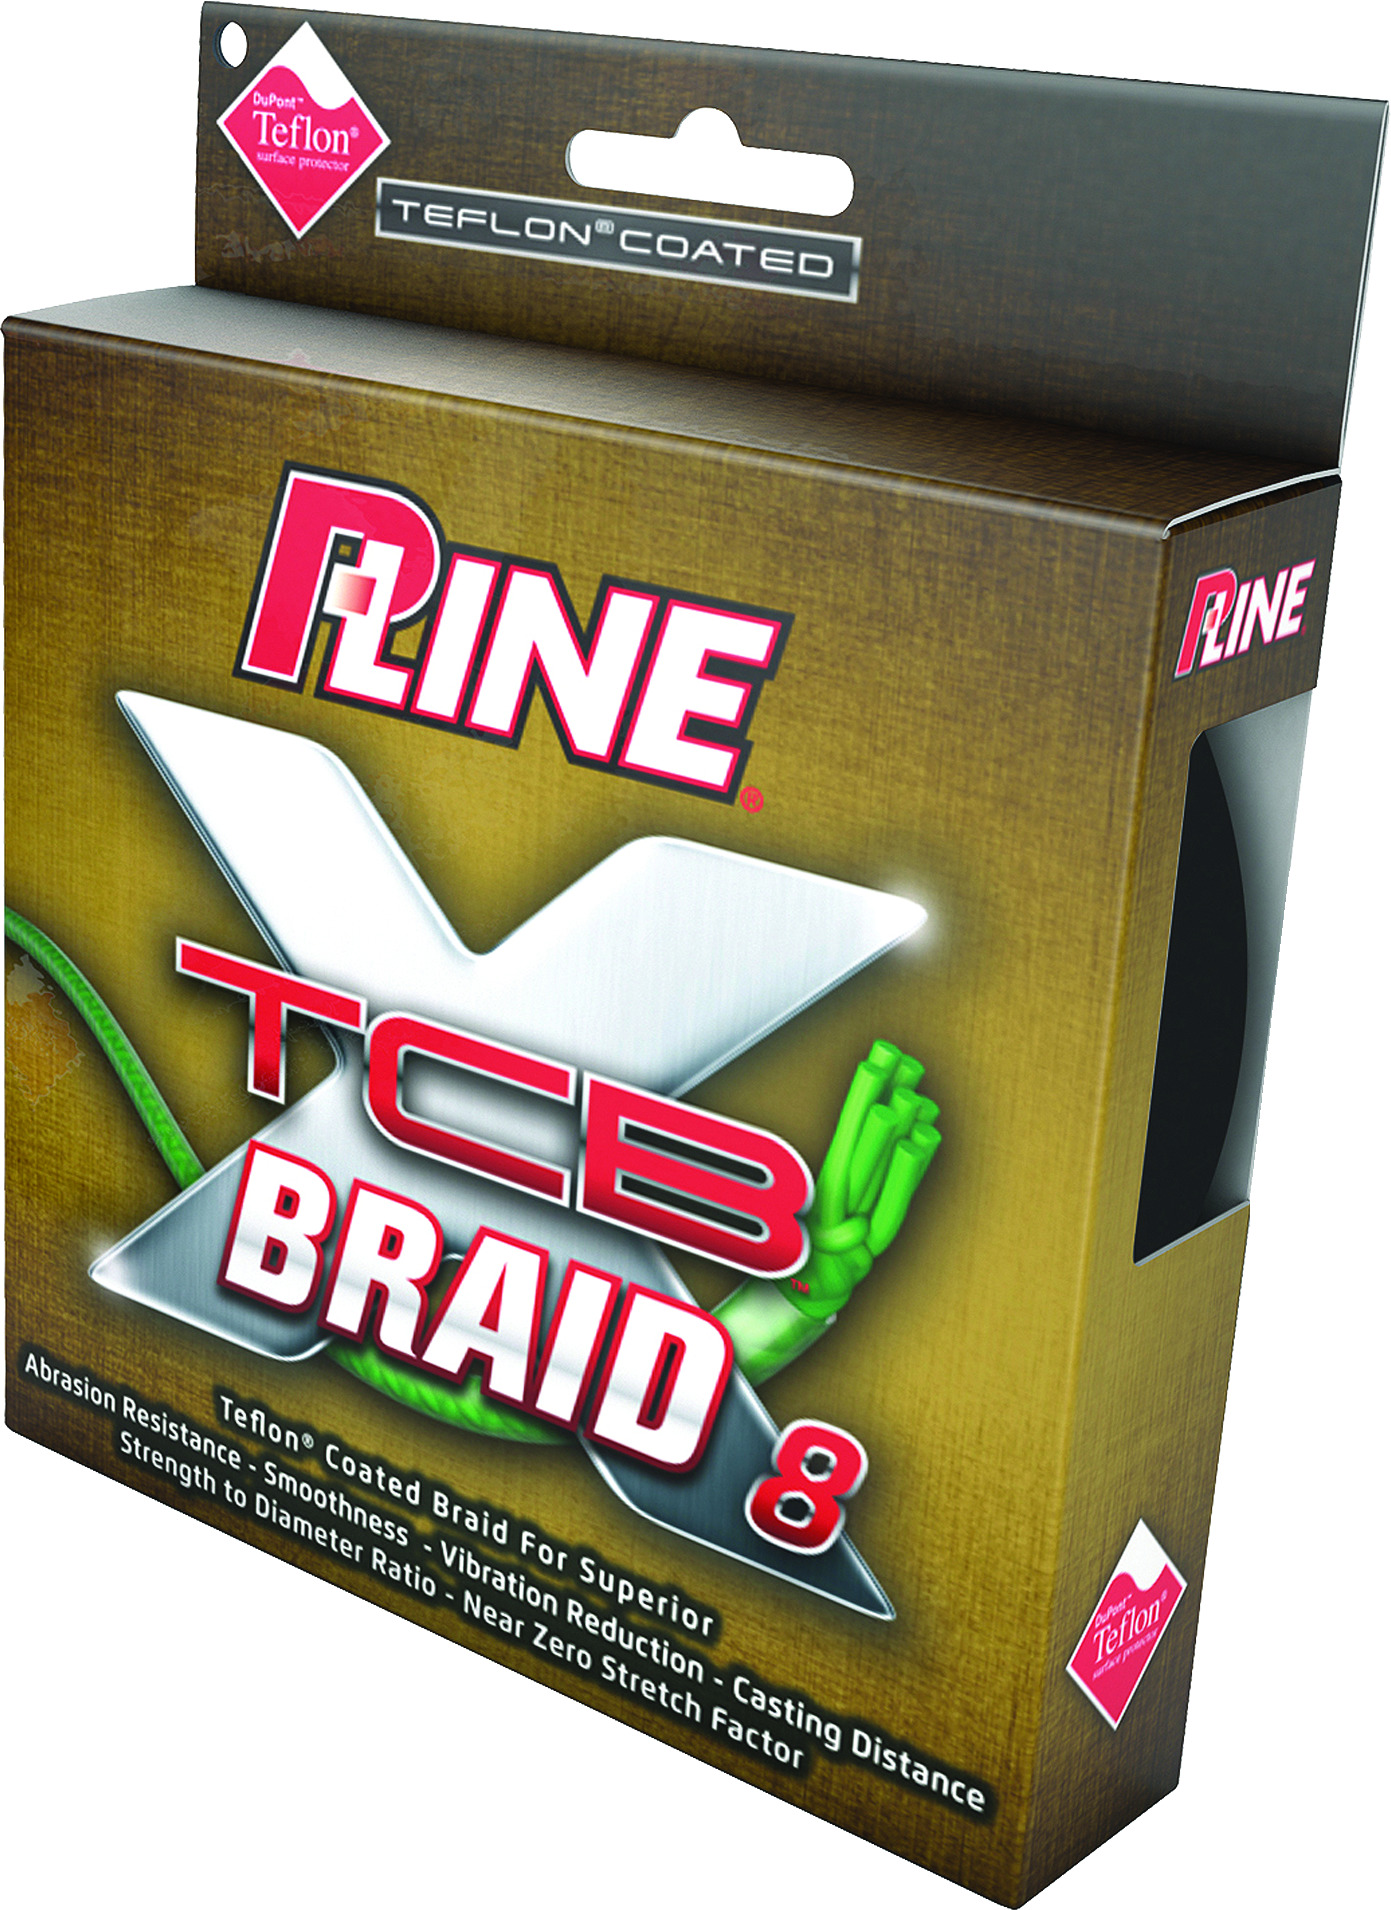 P-Line XTCB 8-Carrier Braided Line — CampSaver